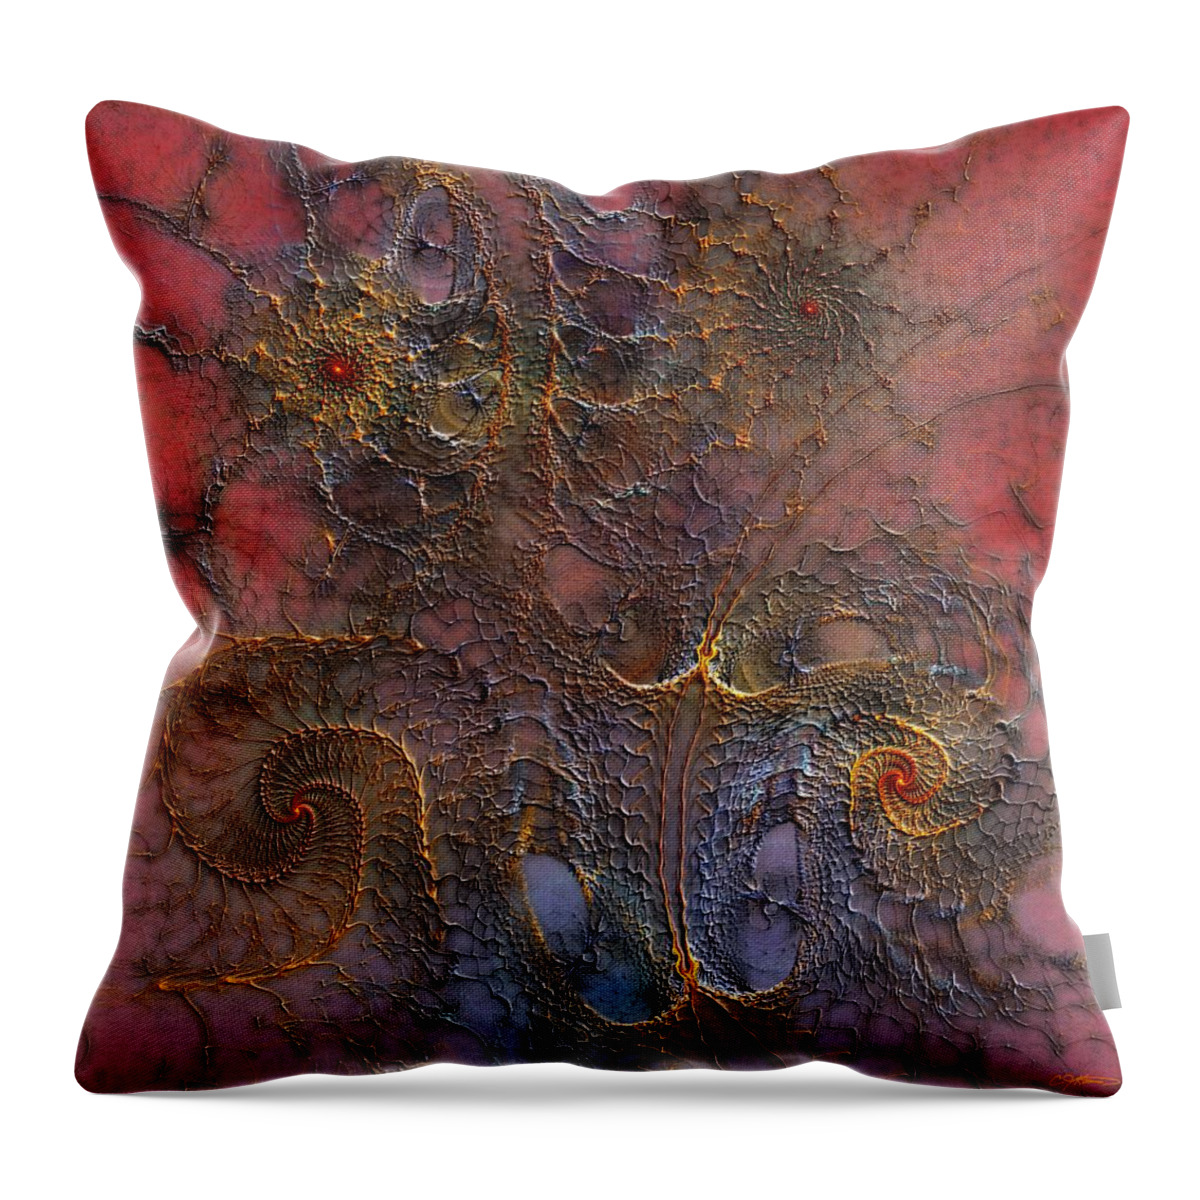 Abstract Throw Pillow featuring the digital art At the Moment by Casey Kotas